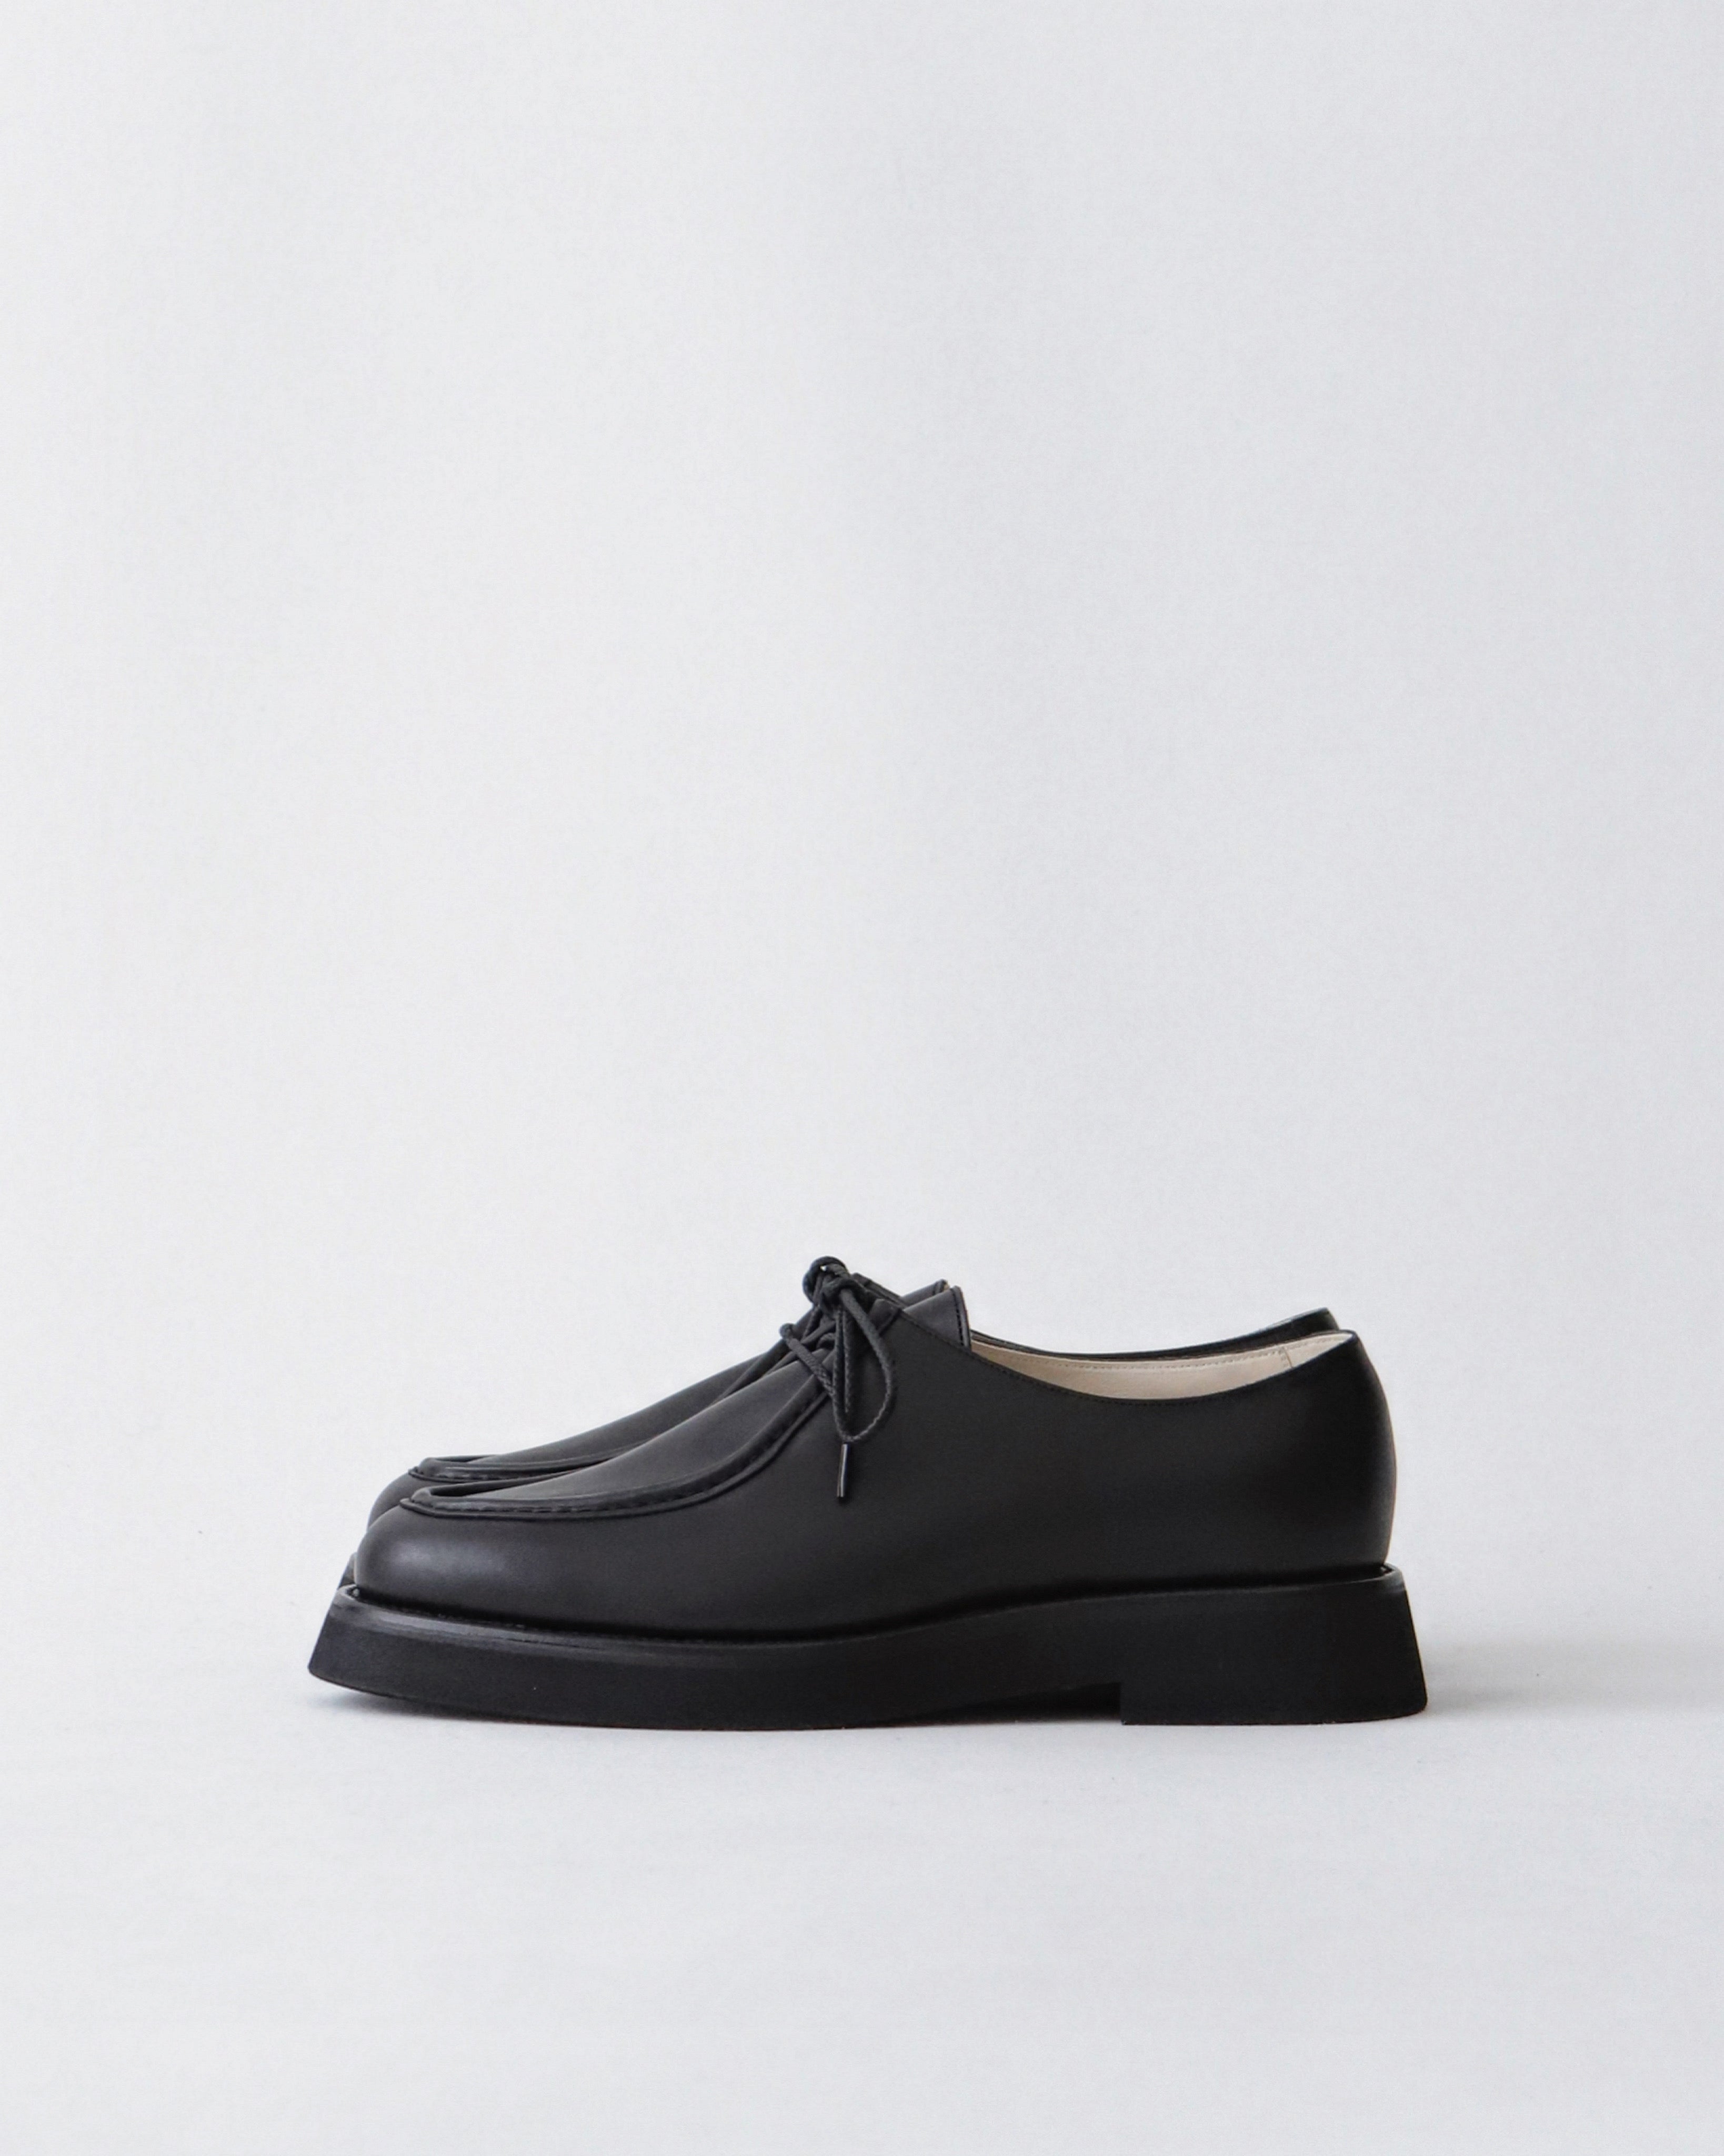 foot the coacher TIROLEAN SHOES（HARDNESS 60 SOLE） – NCNR WEB STORE